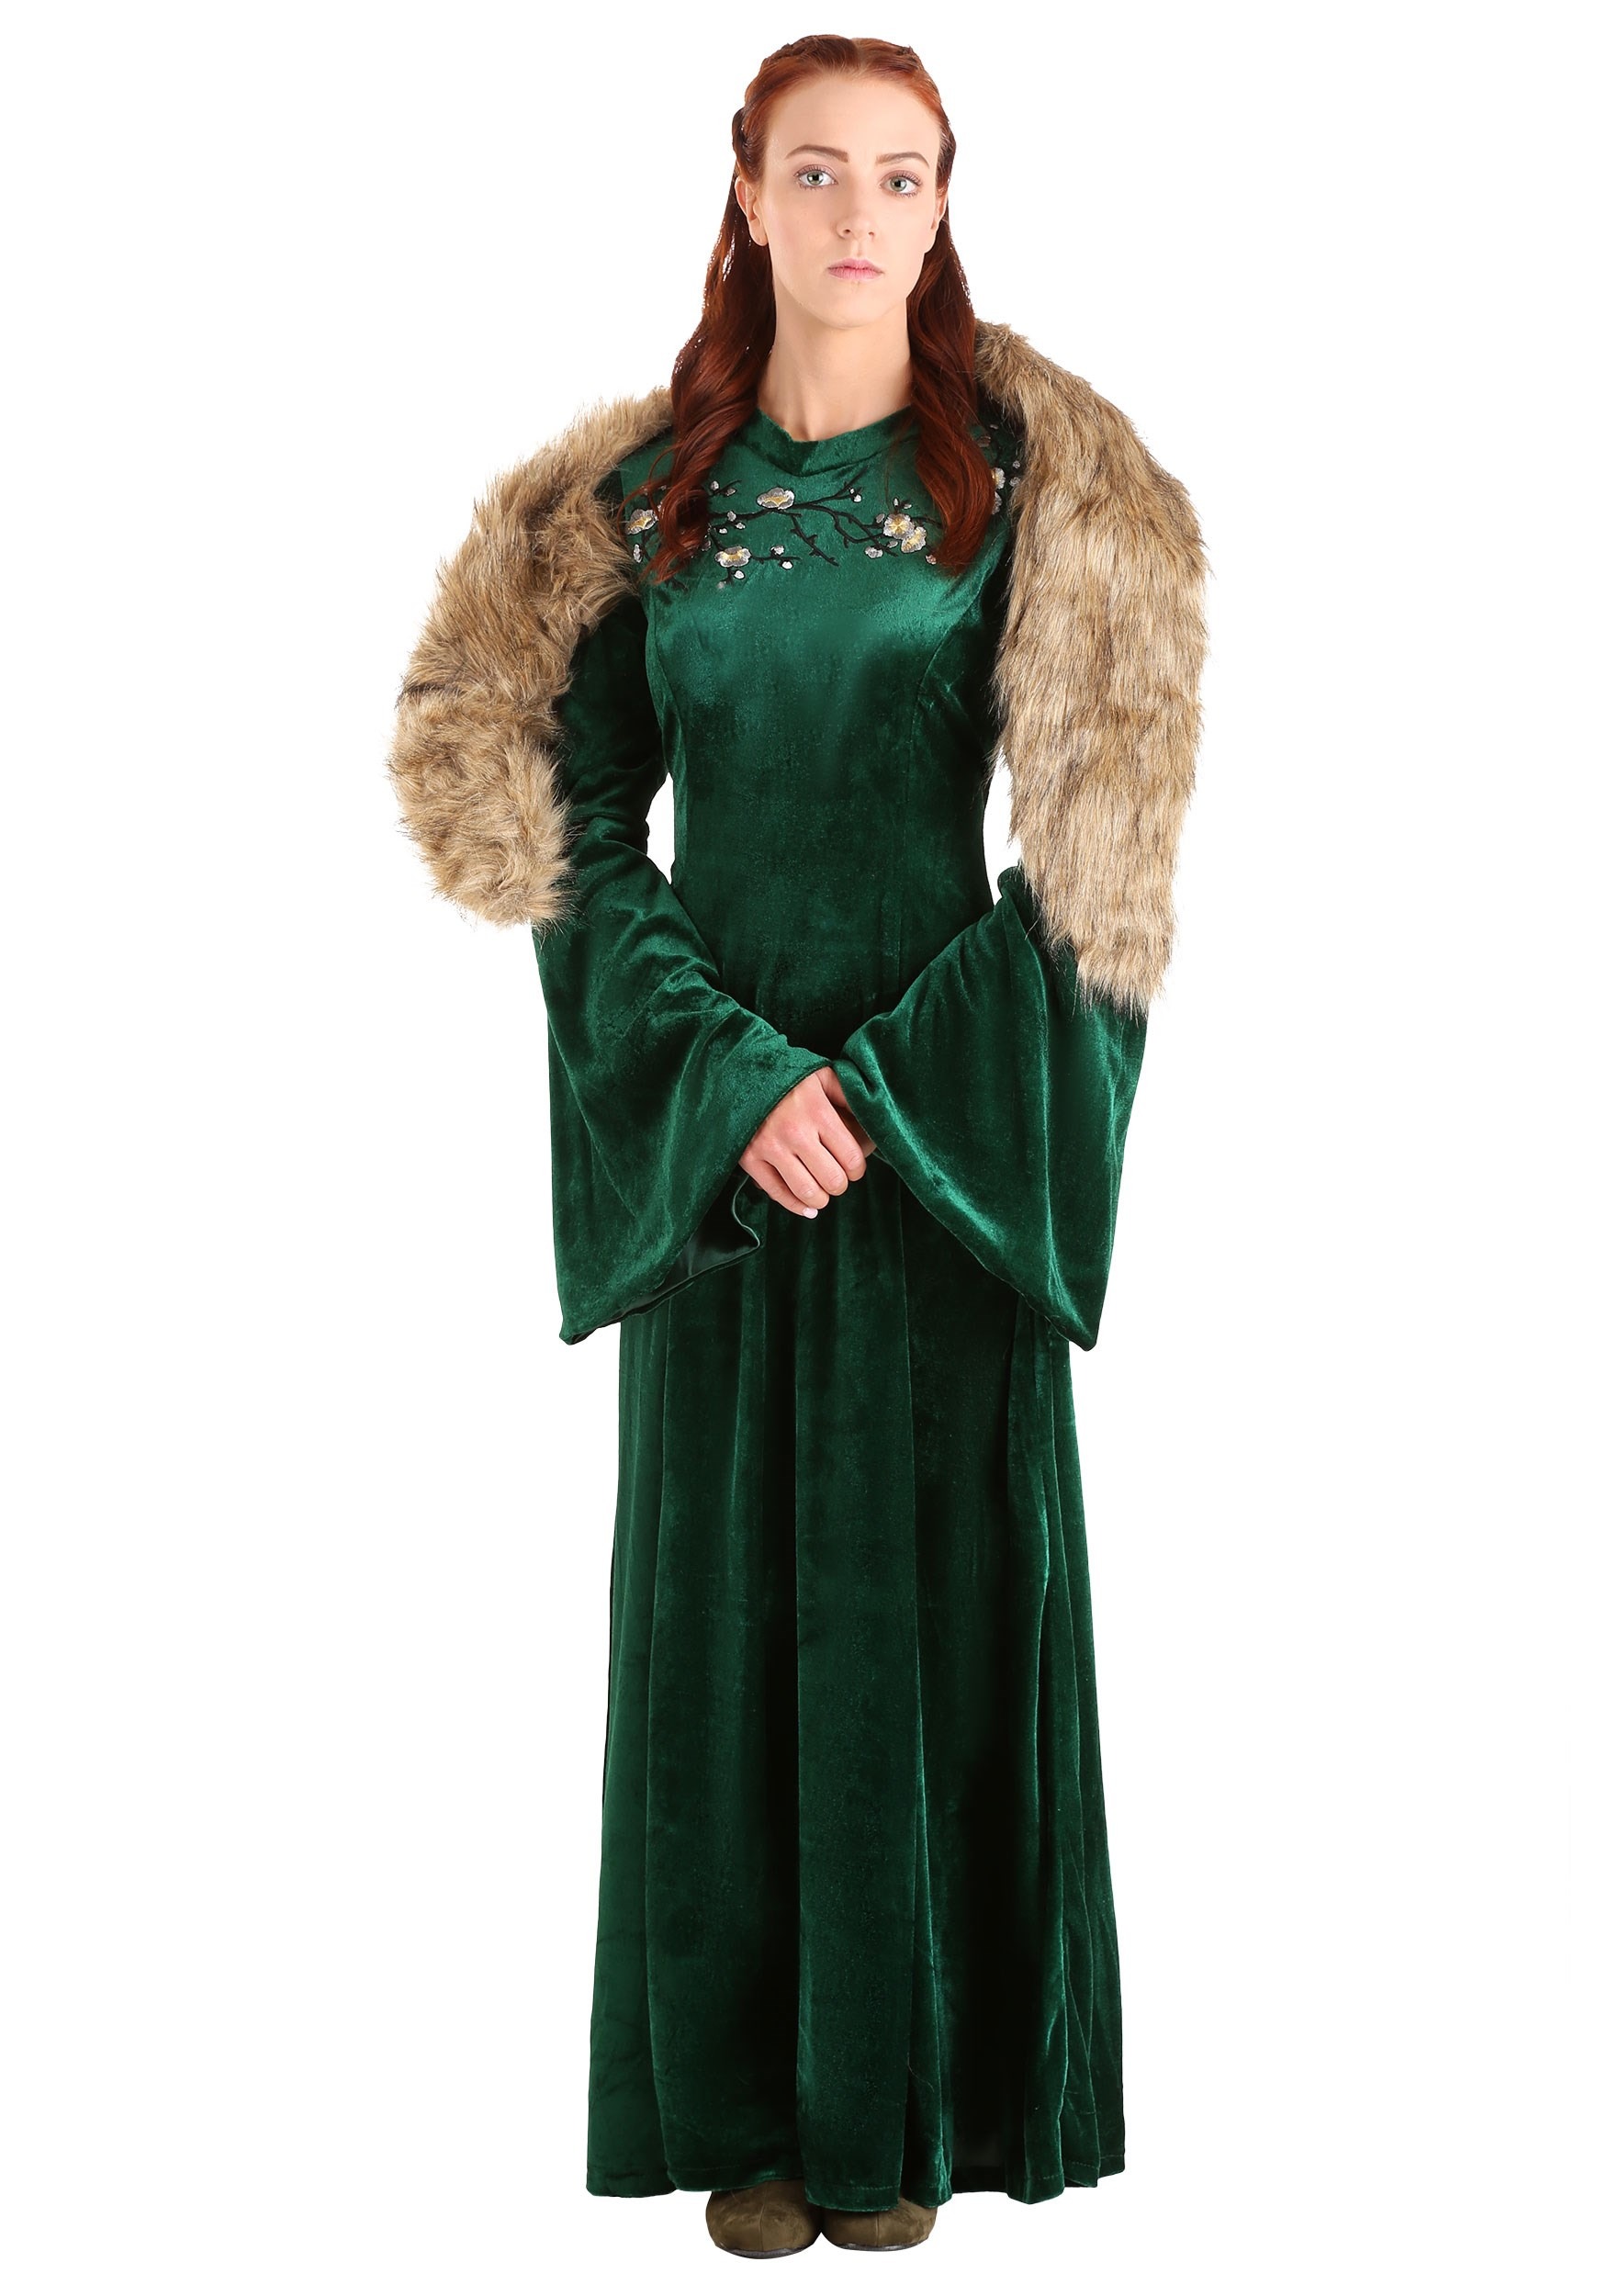 Details about   Princess Paradise Howlette Werewolf Adult Womens Halloween Costume PP4163AD 